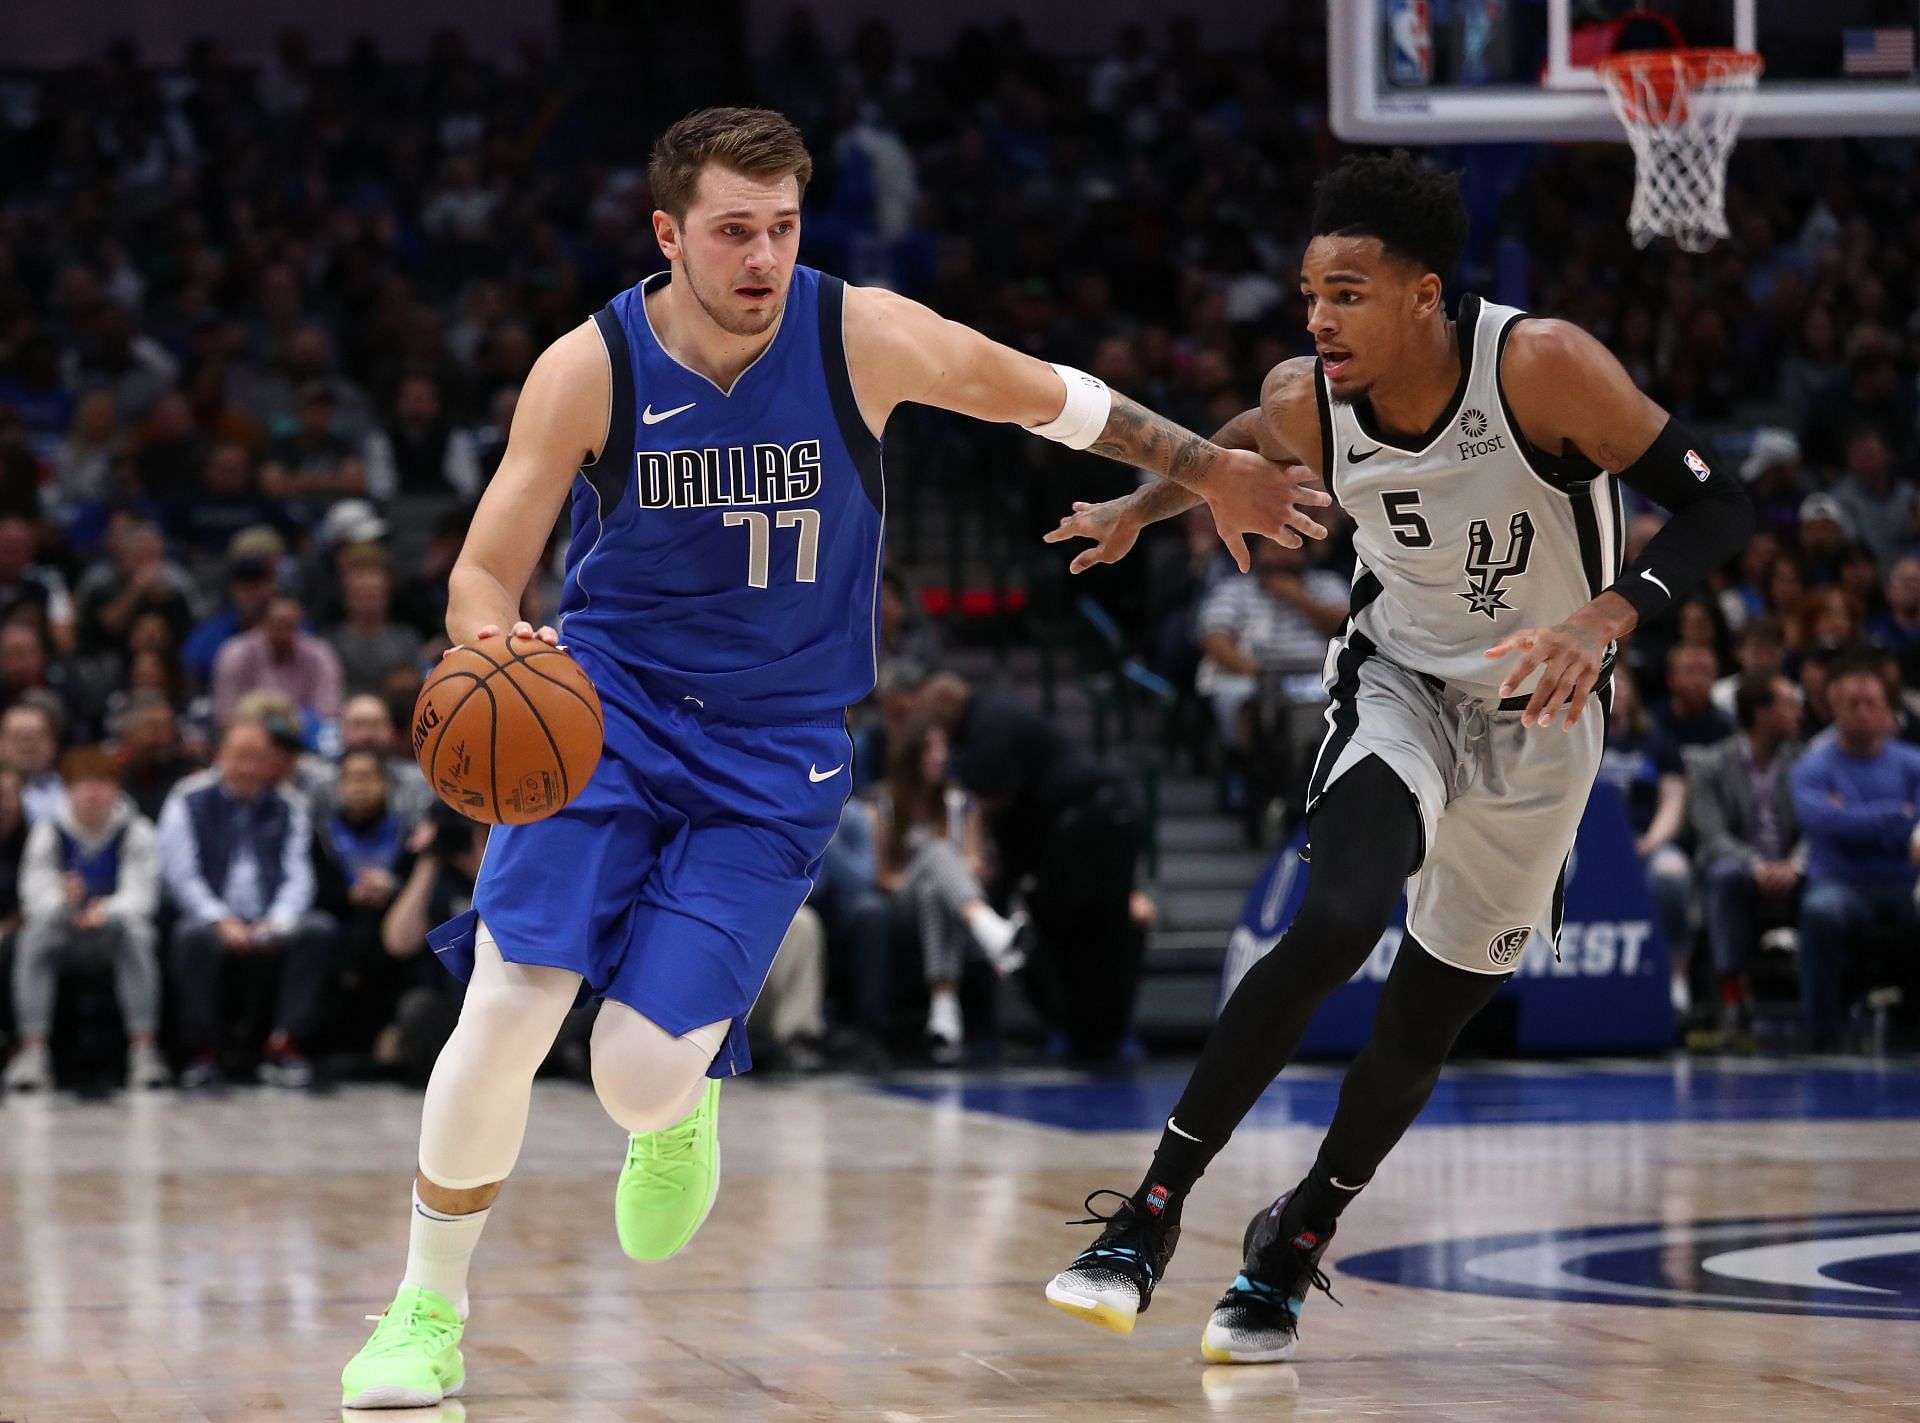 The Dallas Mavericks and the San Antonio Spurs will meet again for the third time this season in San Antonio on Friday.